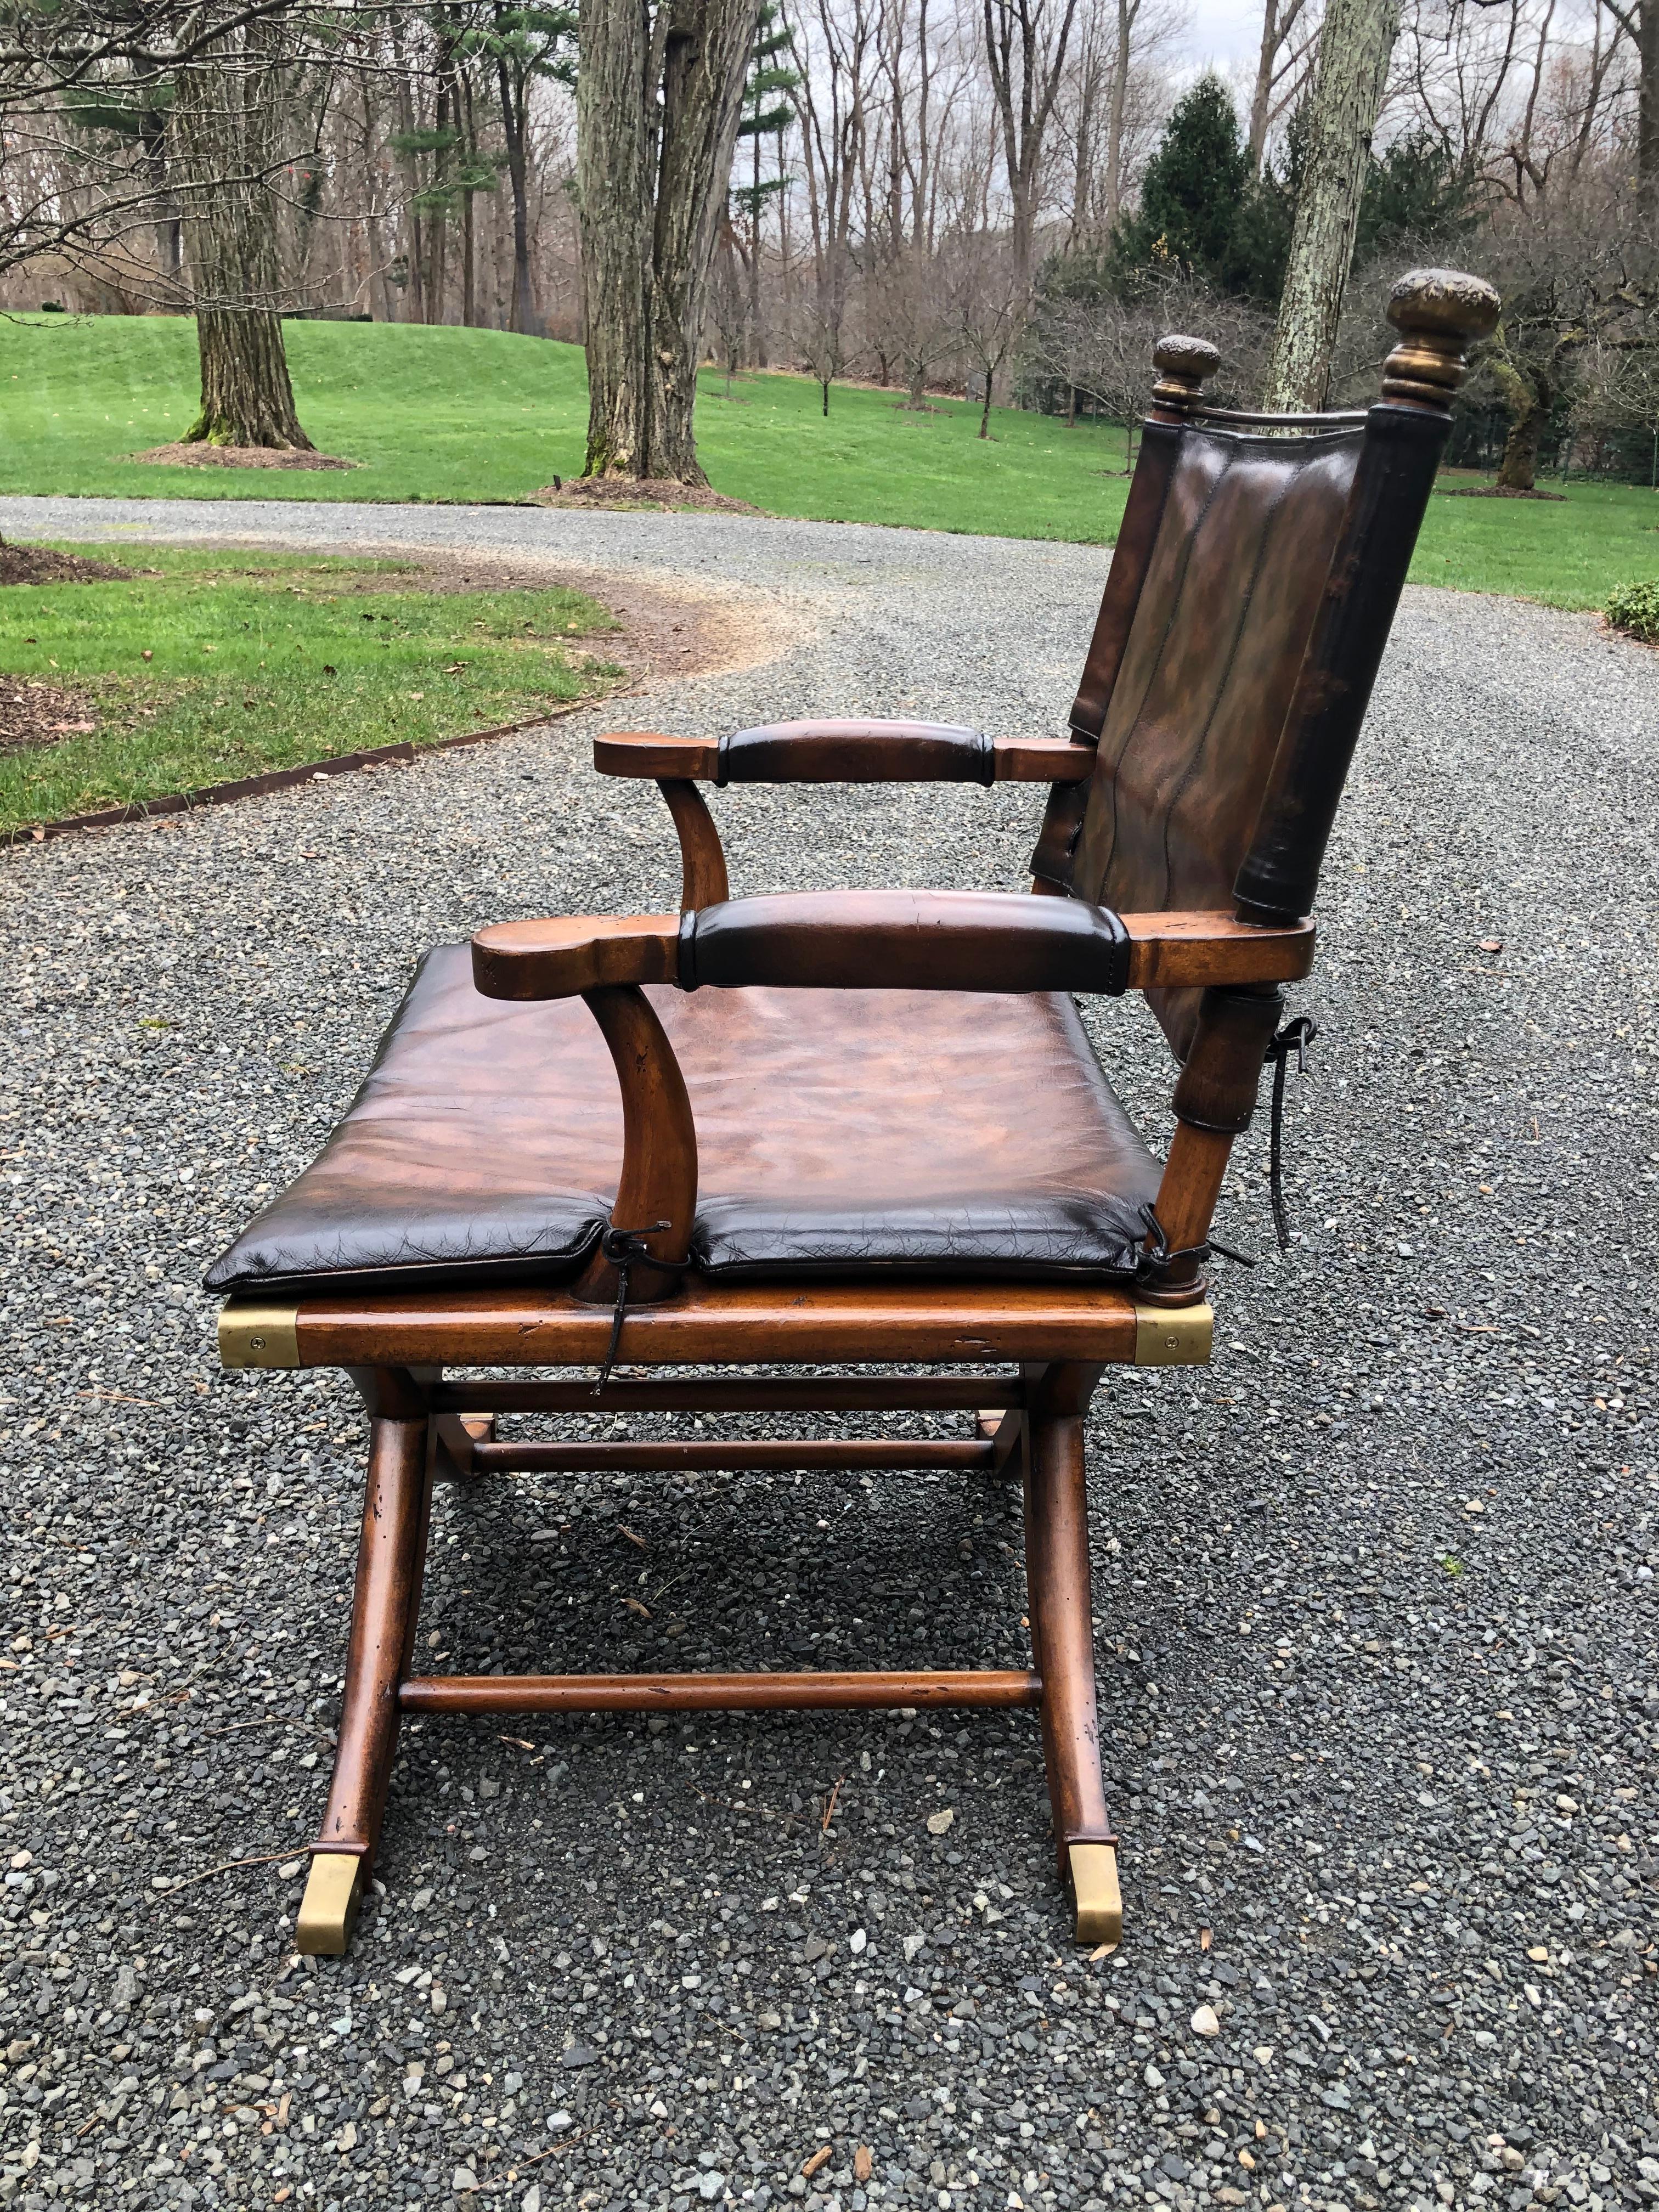 Handsome Campaign or safari chair in mahogany and leather. This chair has a leather back and seat cushion with ties; the seat underneath is wood and is beautifully decorated with antiqued brass mounts on the feet and the seat and has a medallion